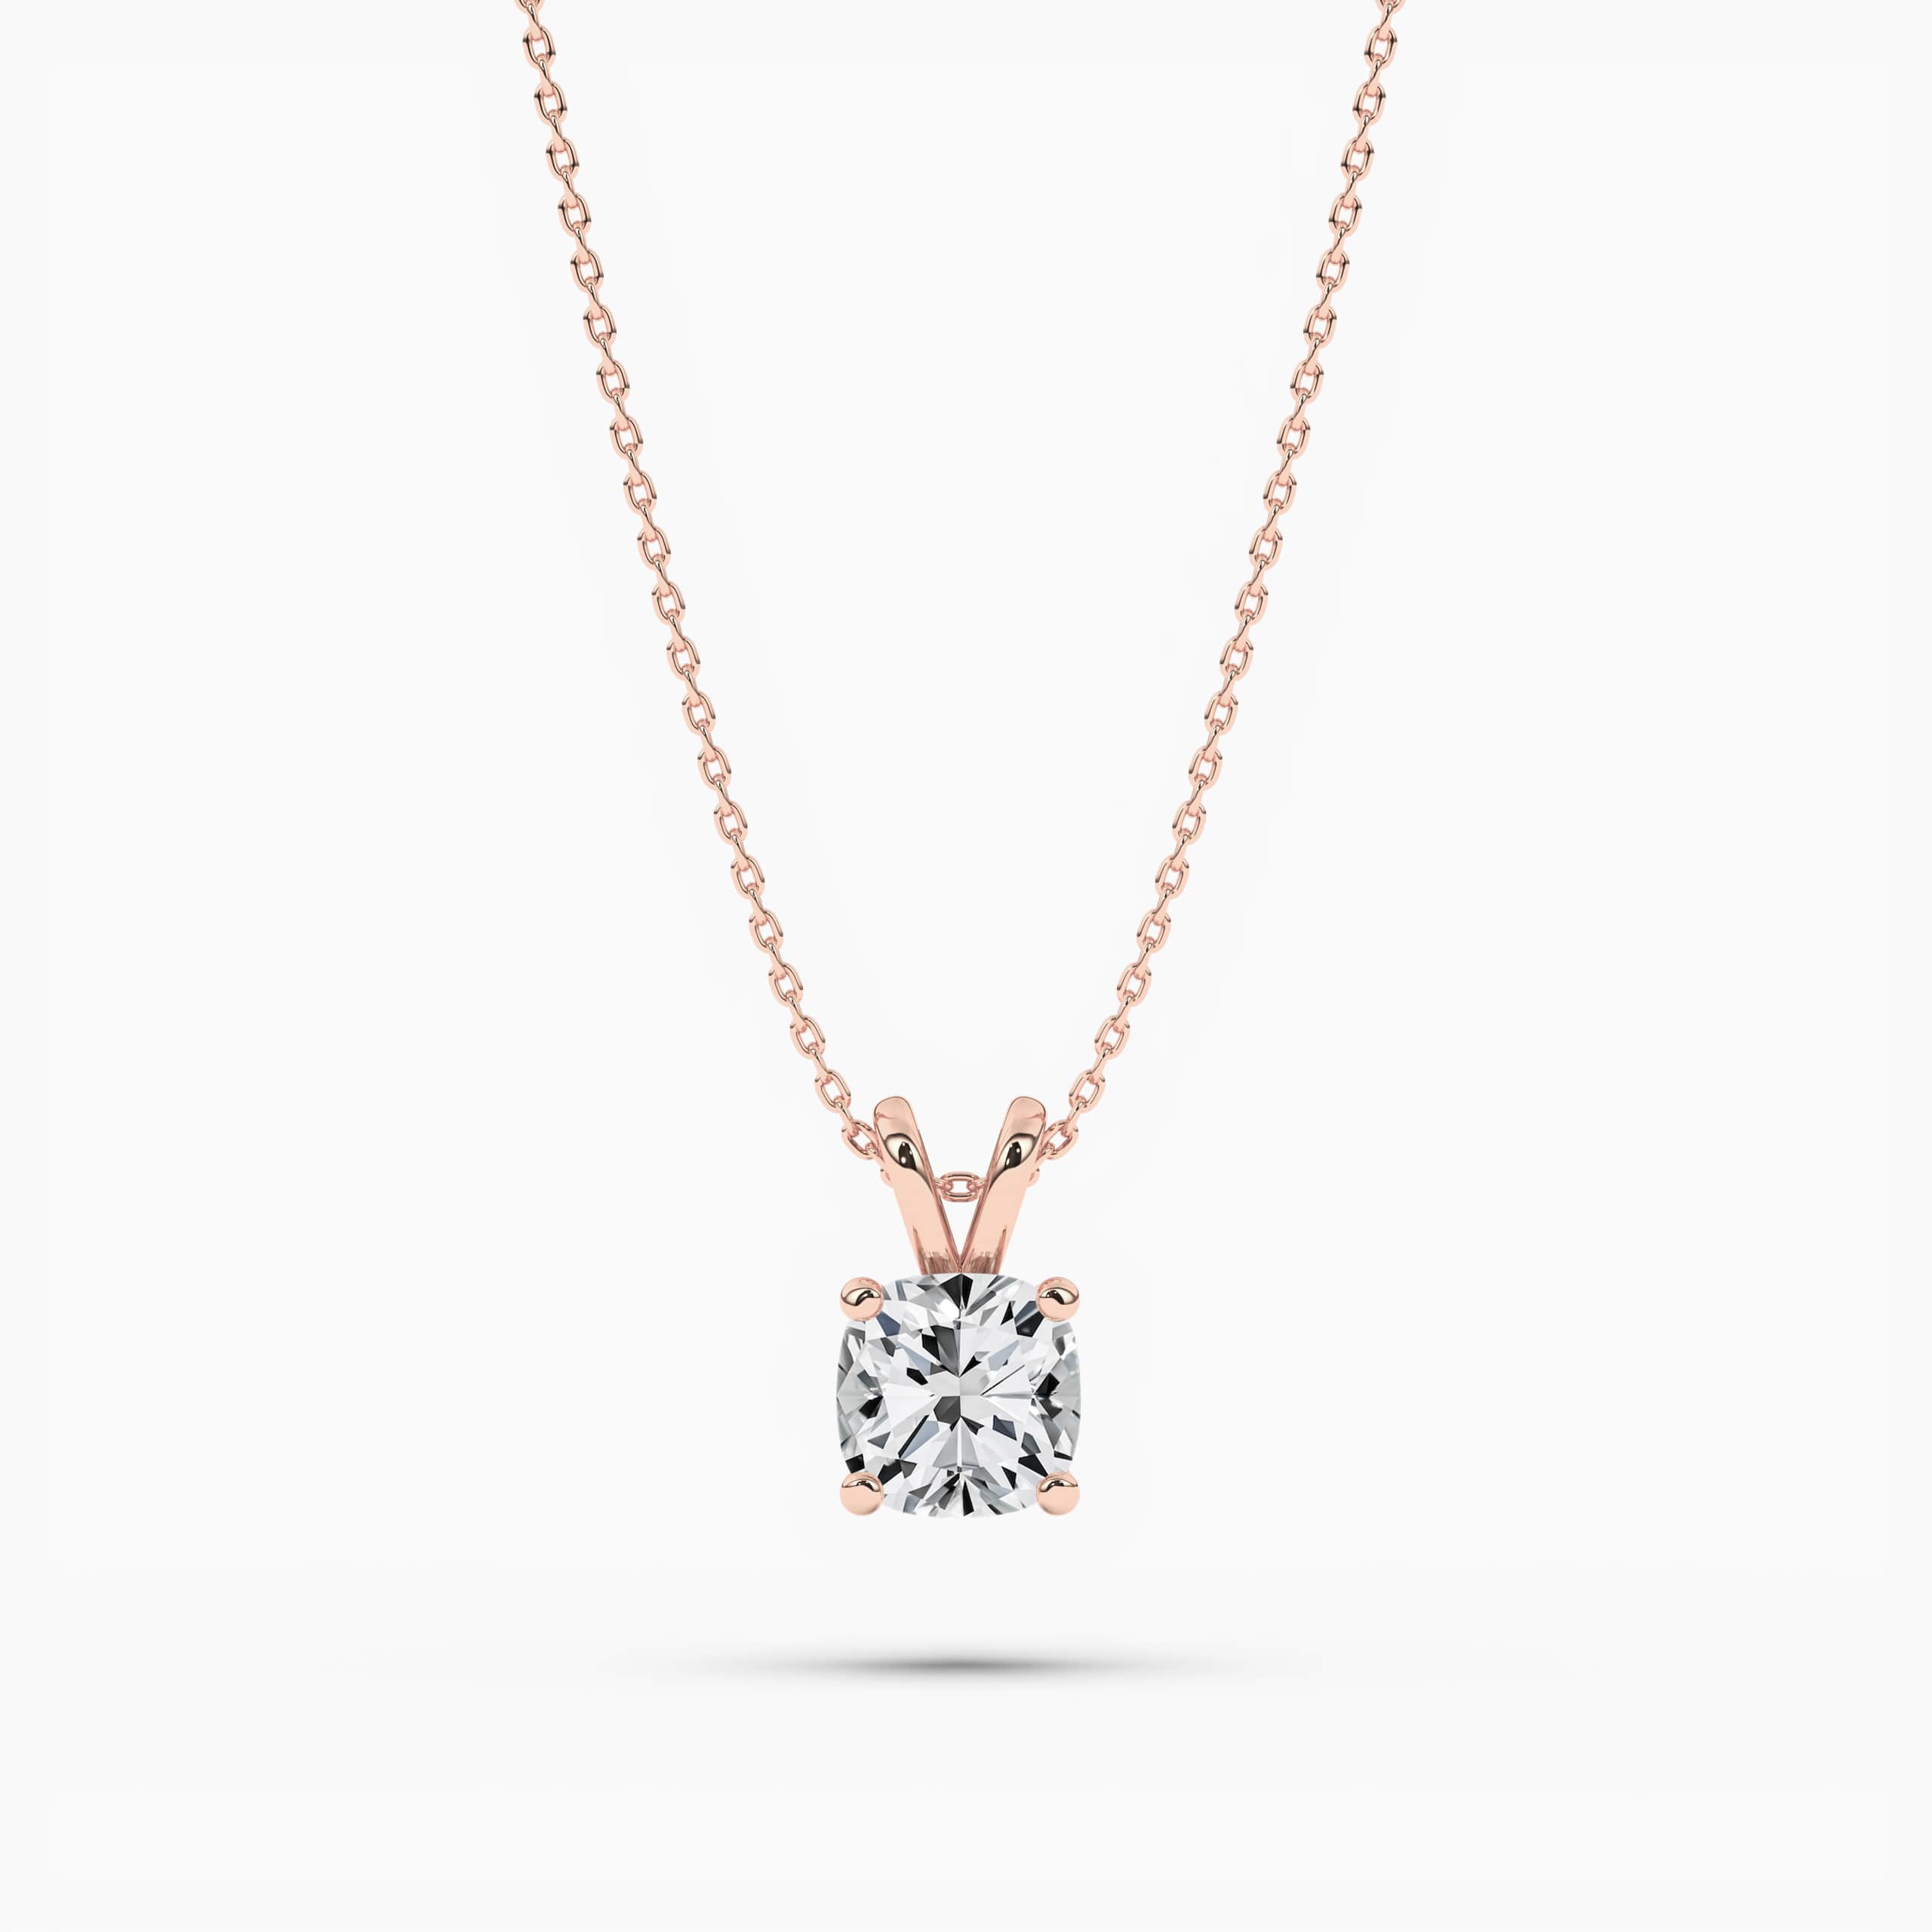 Diamond Solitaire Pendant Necklace in Rose Gold